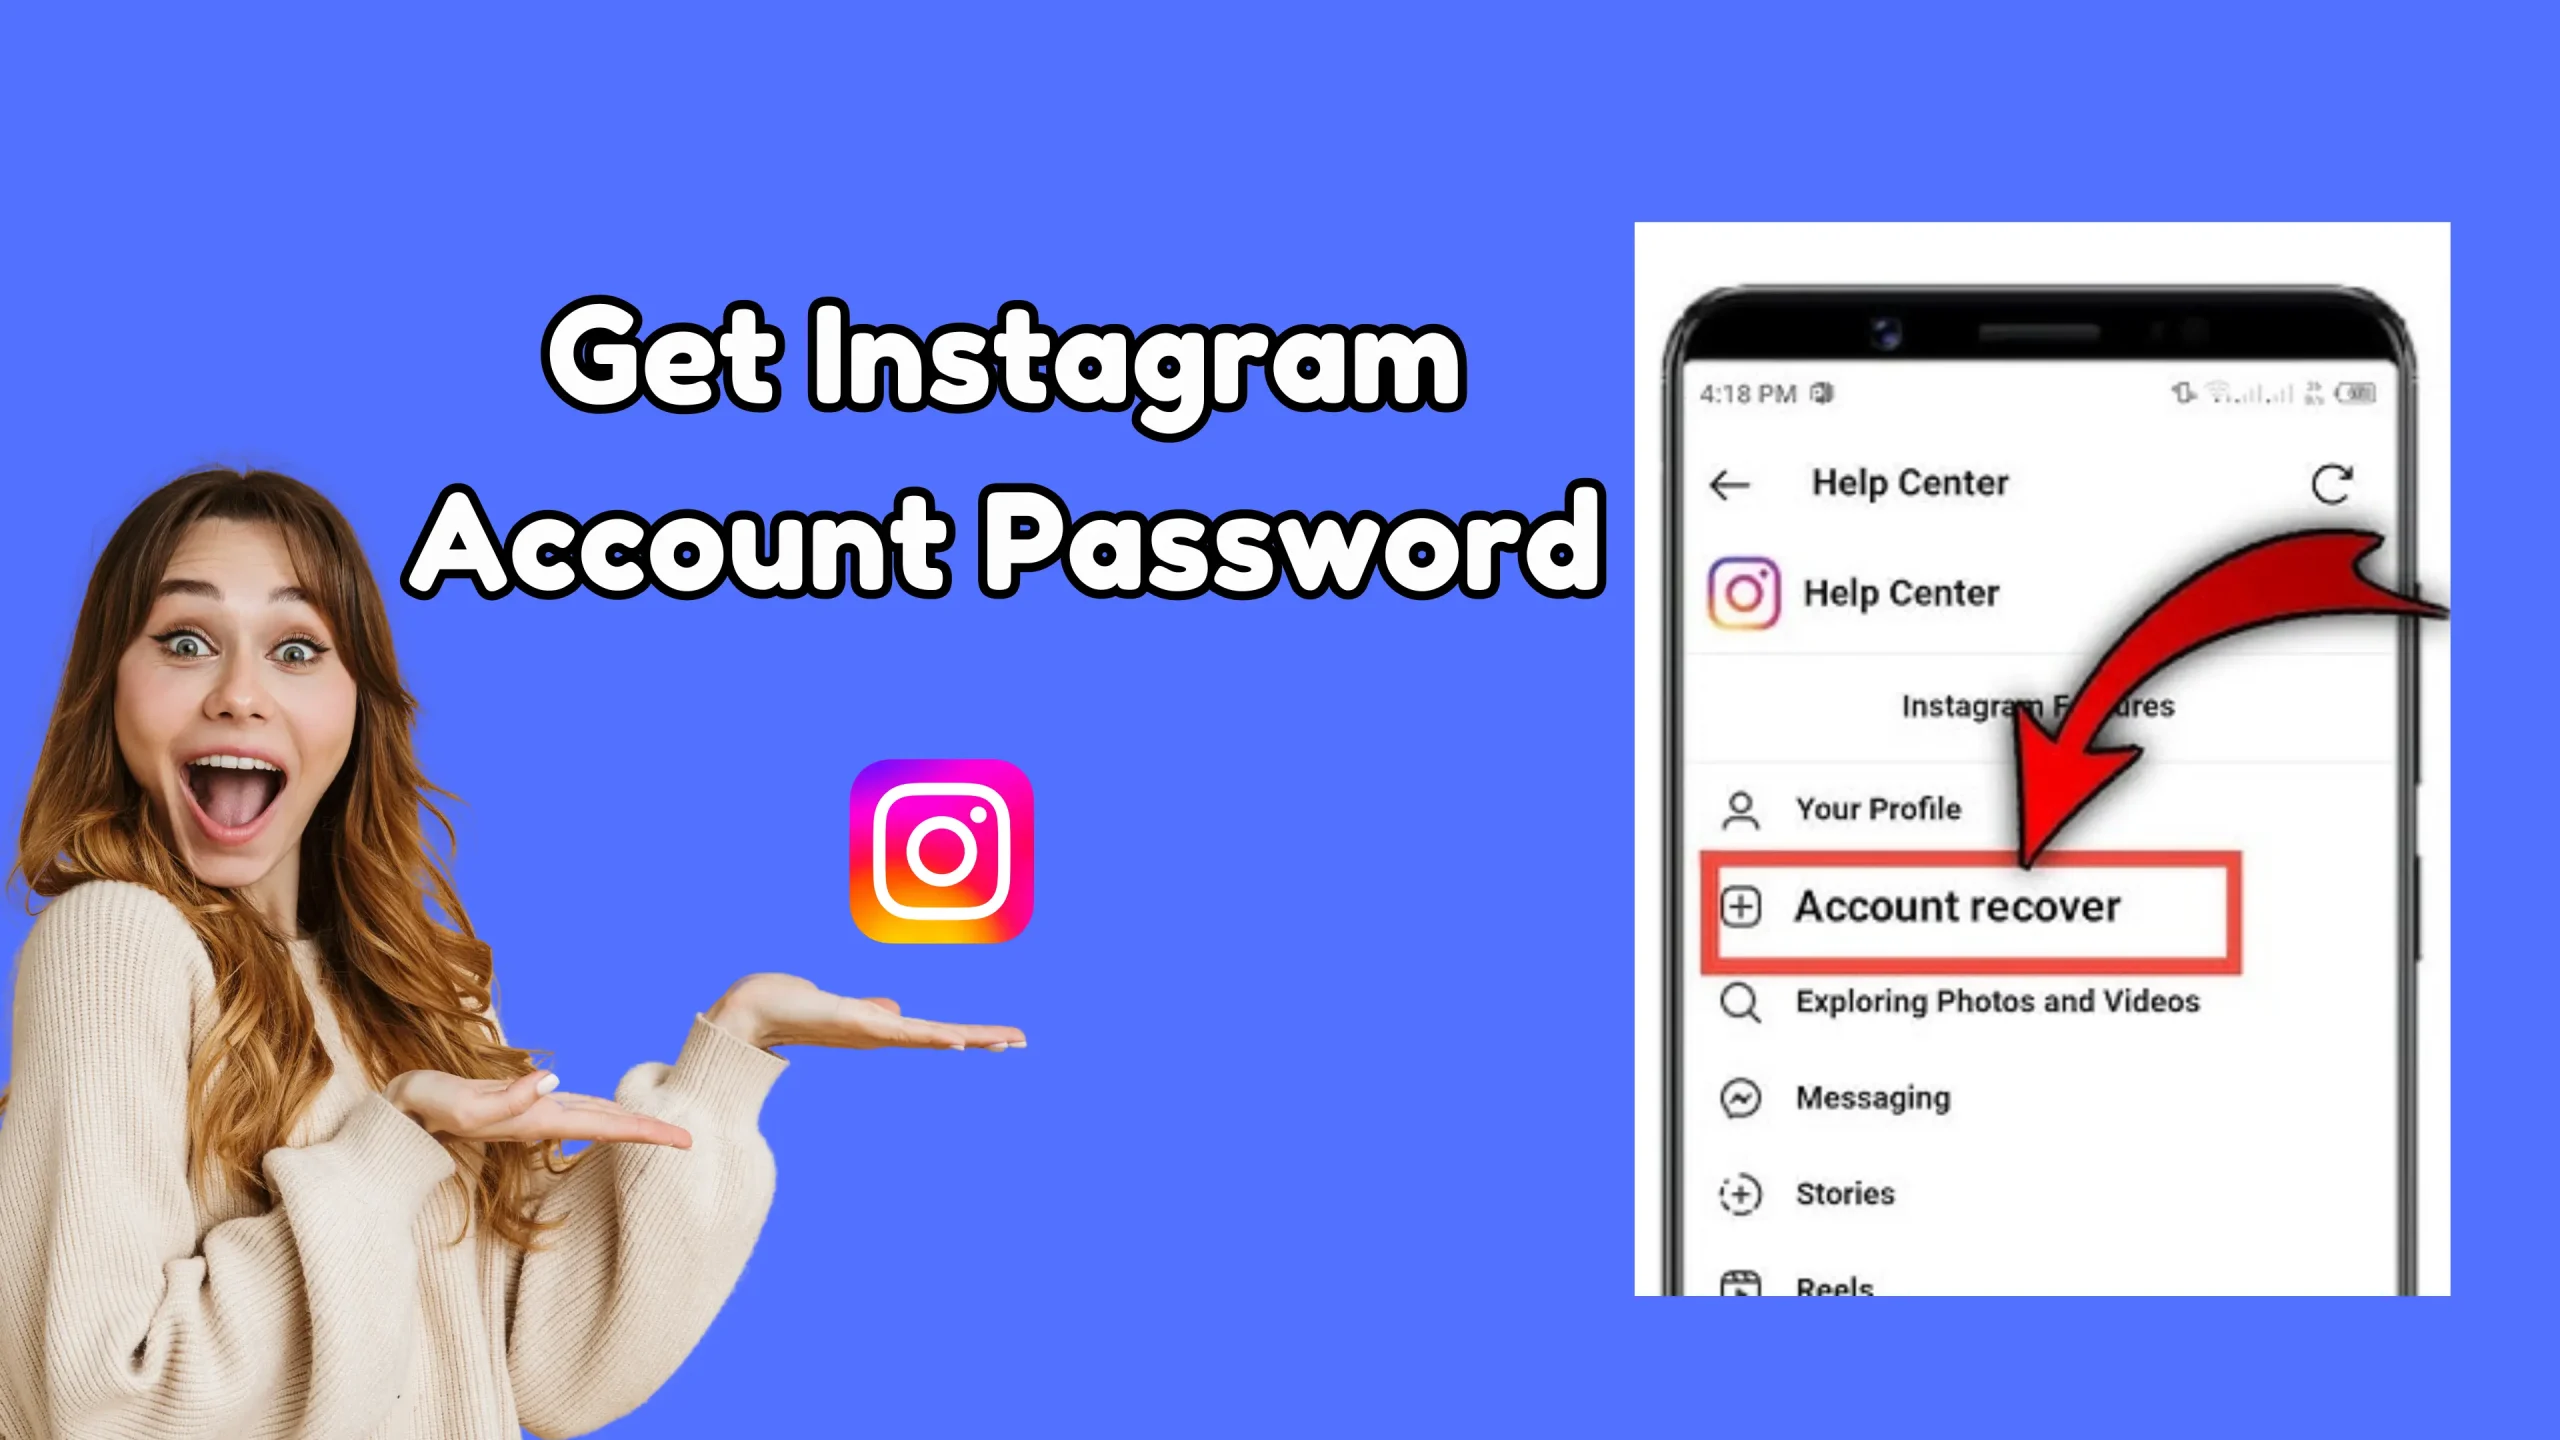 How to Get an Instagram Account Password Without Mobile Number?